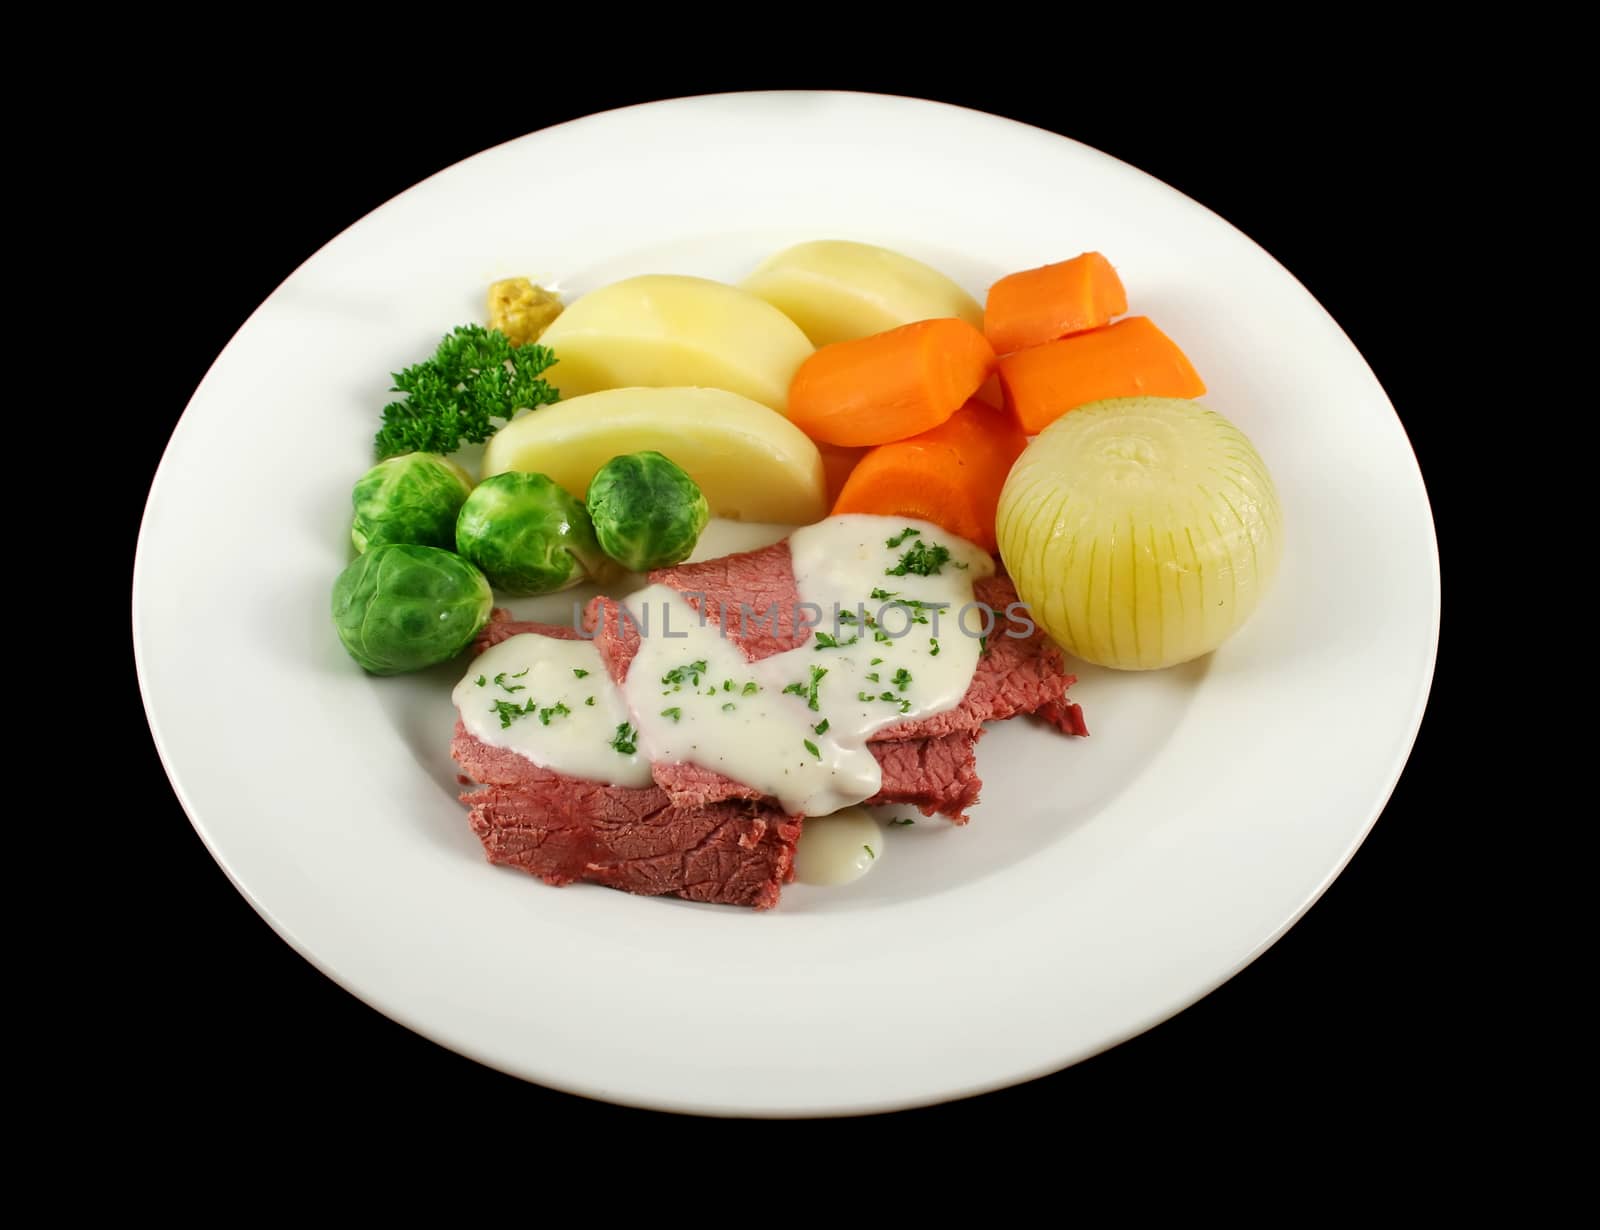 Delicious sliced corn beef with white sauce and vegetables.